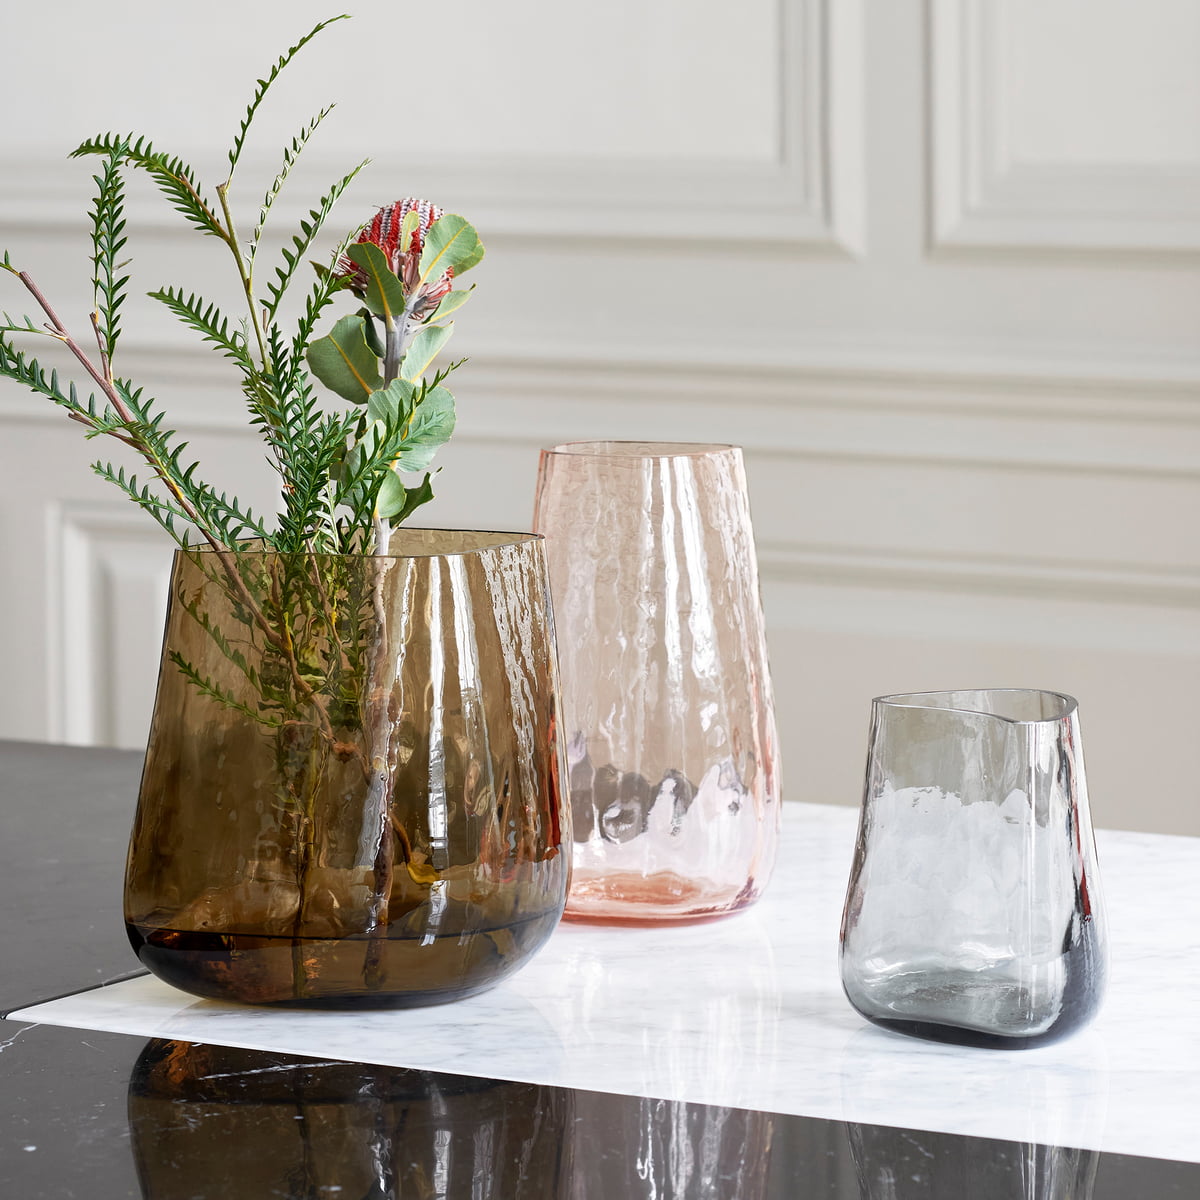 & - Collect Glass Vase Connox